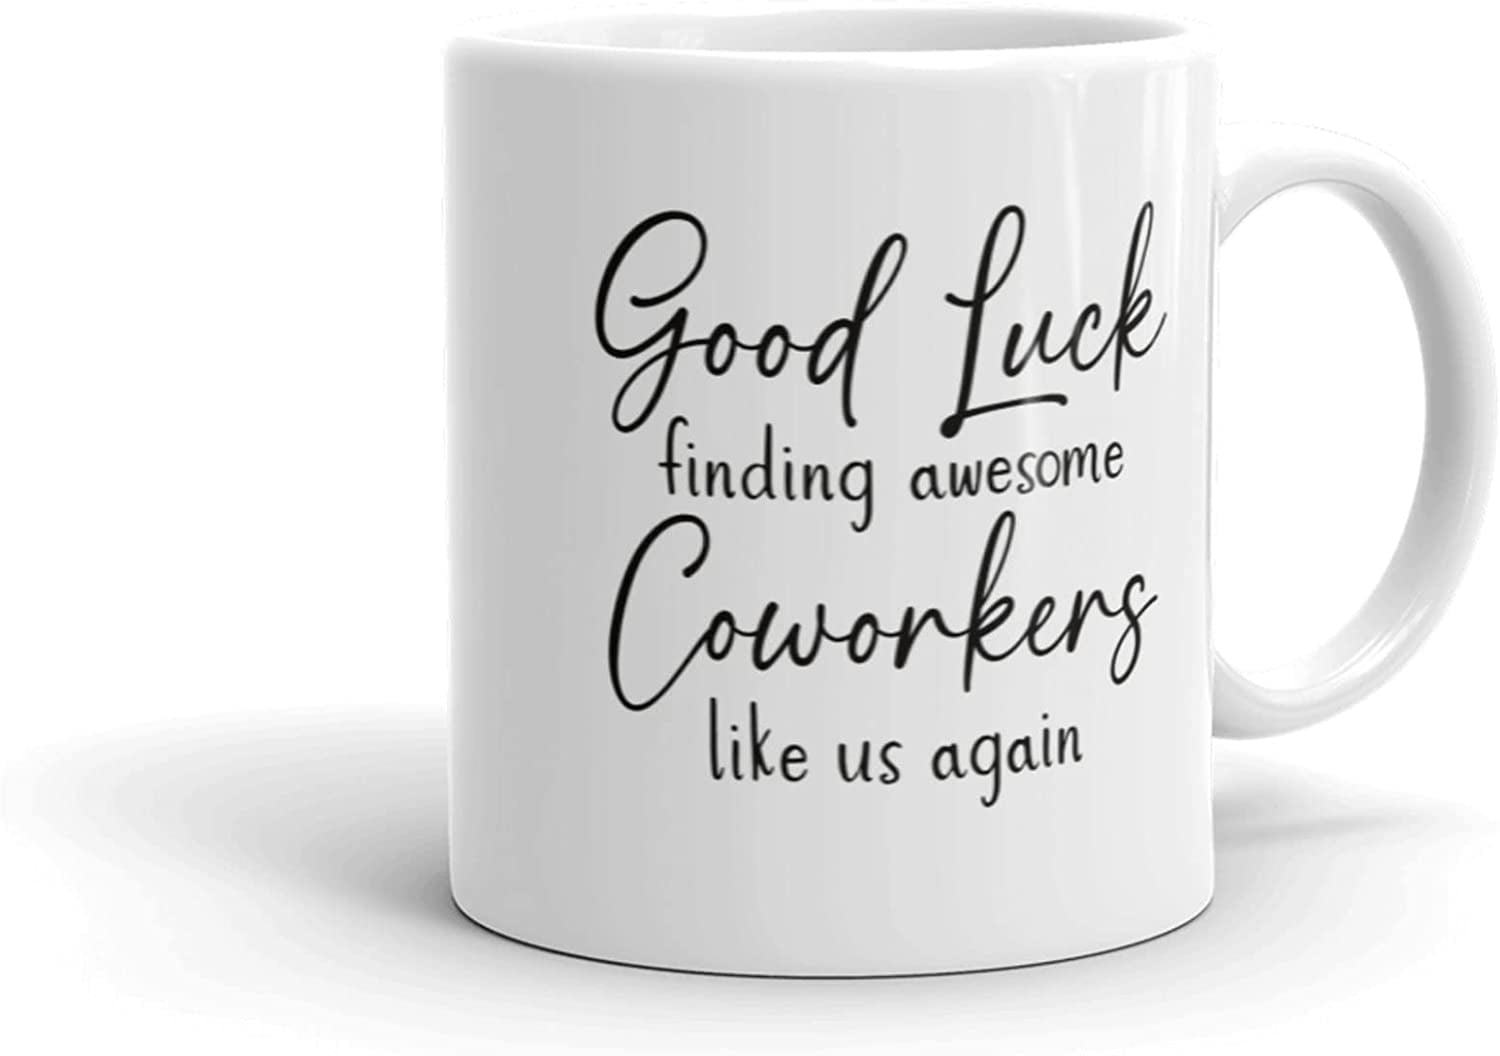 Coworker Gifts Office Gifts for Women Employee Gifts Christmas Personalized  Gifts for Coworkers Personalized Holiday Gifts MUG 